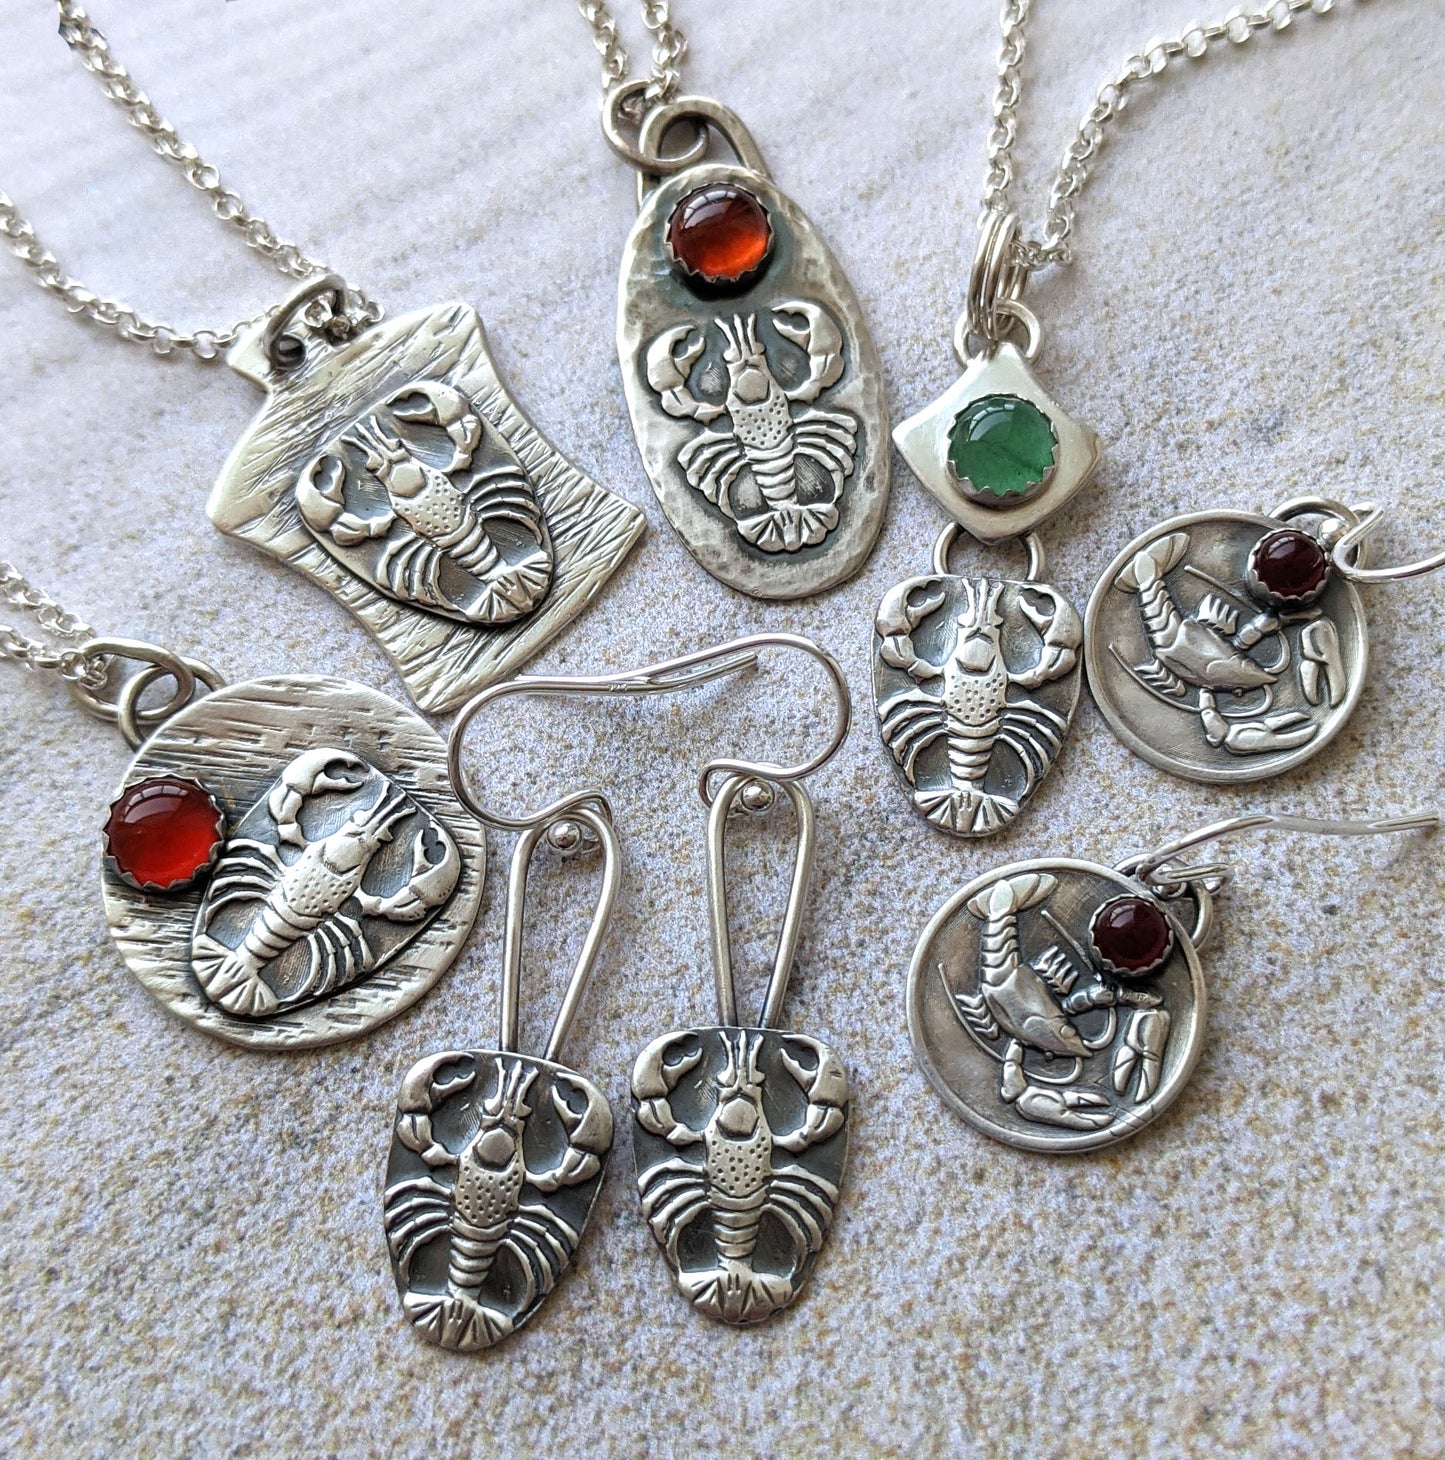 Collection of lobster jewelry. Showing several sterling silver pendants and earrings. There are two different lobster designs and some of the pendants and earrings have gemstone cabochons.